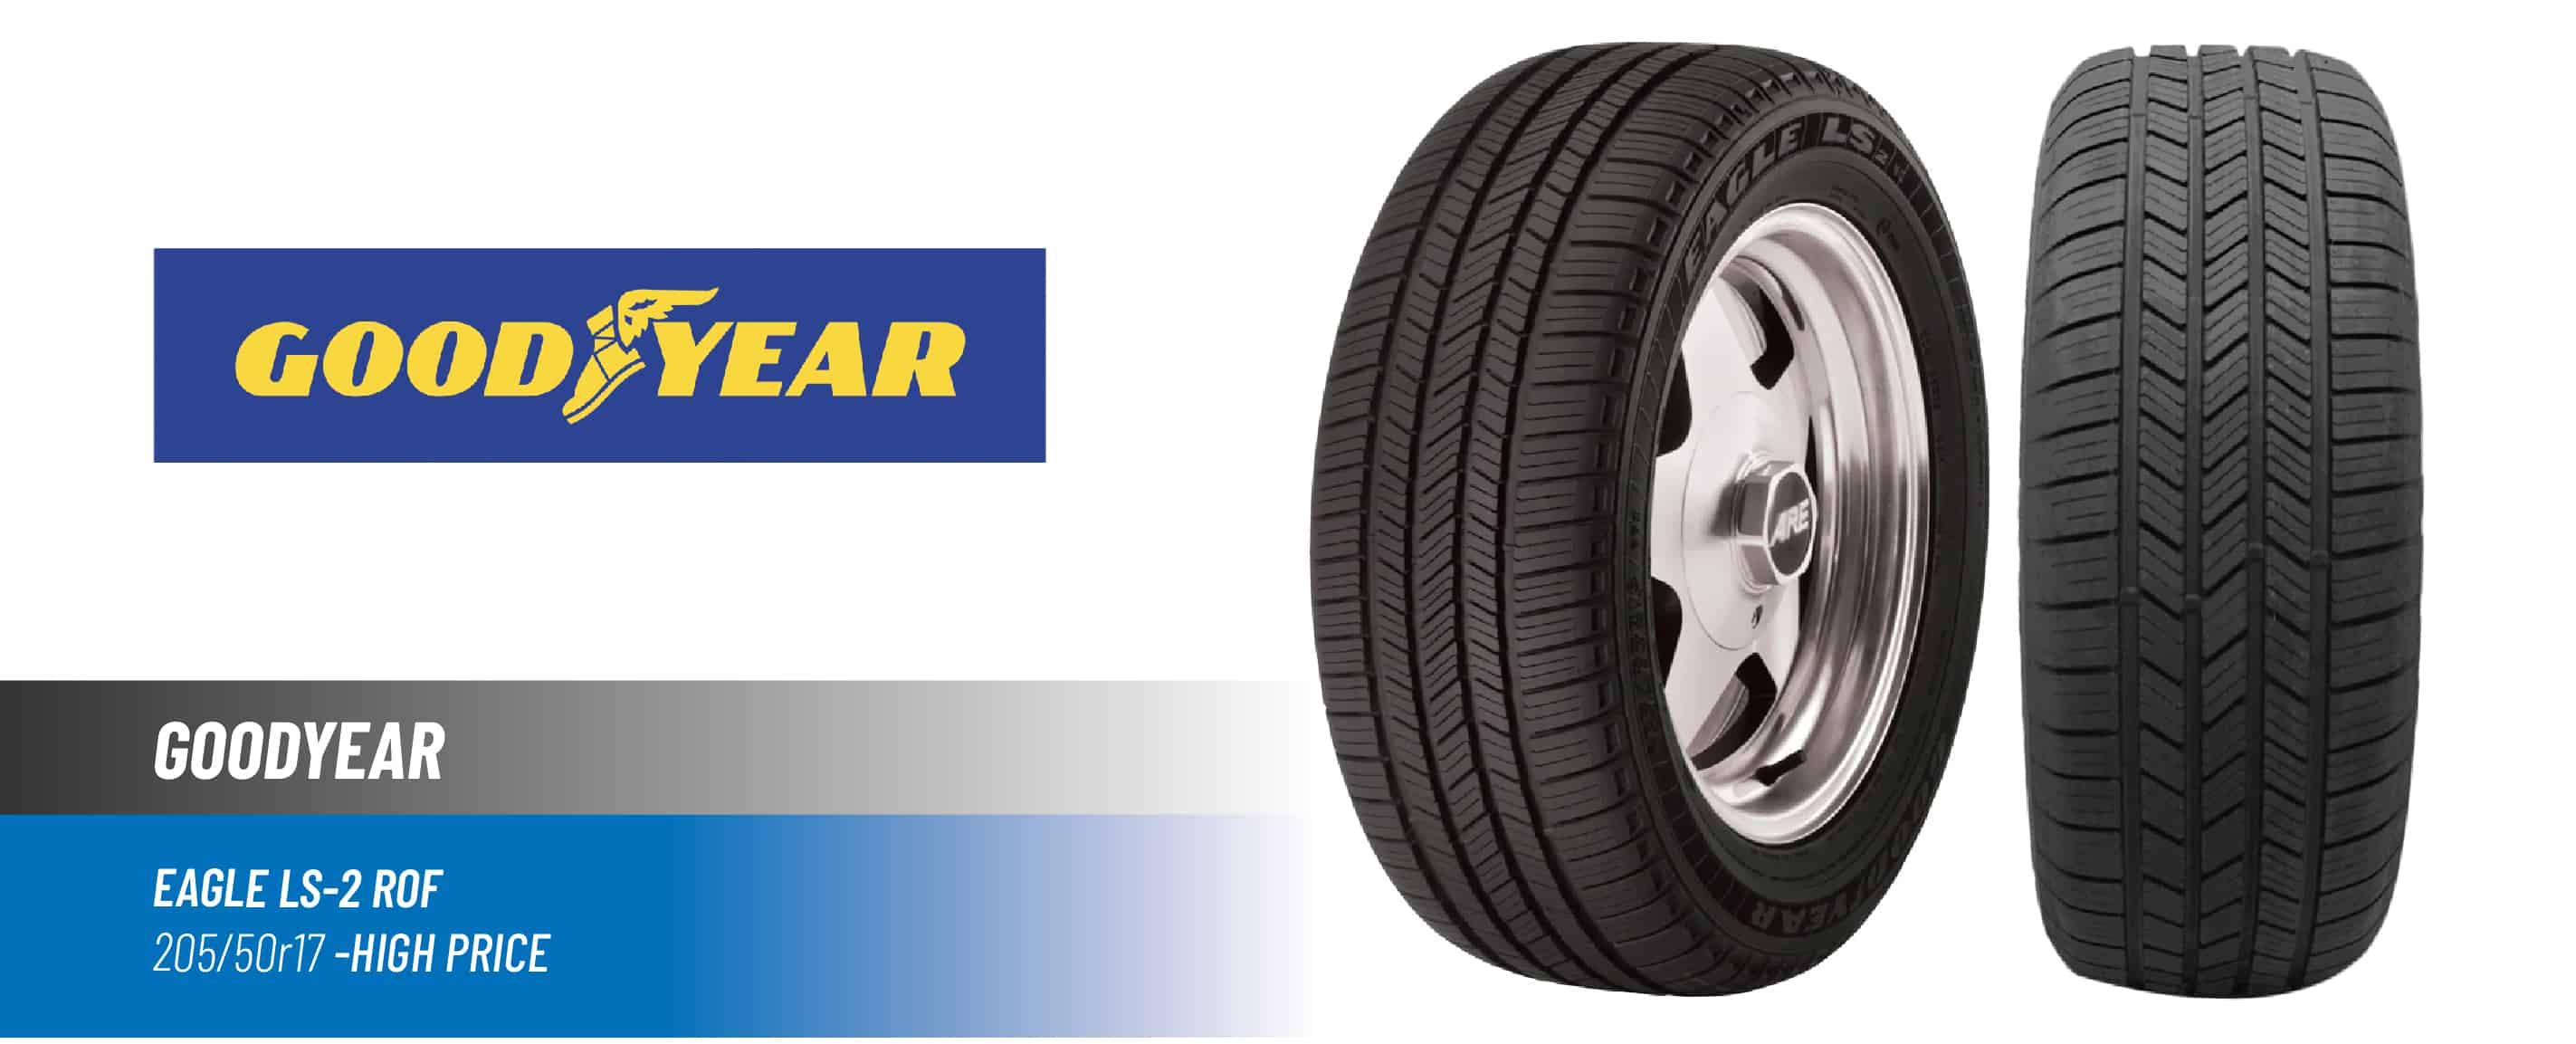 Top#1 High Price: Goodyear Eagle LS-2 ROF –best 205/50r17